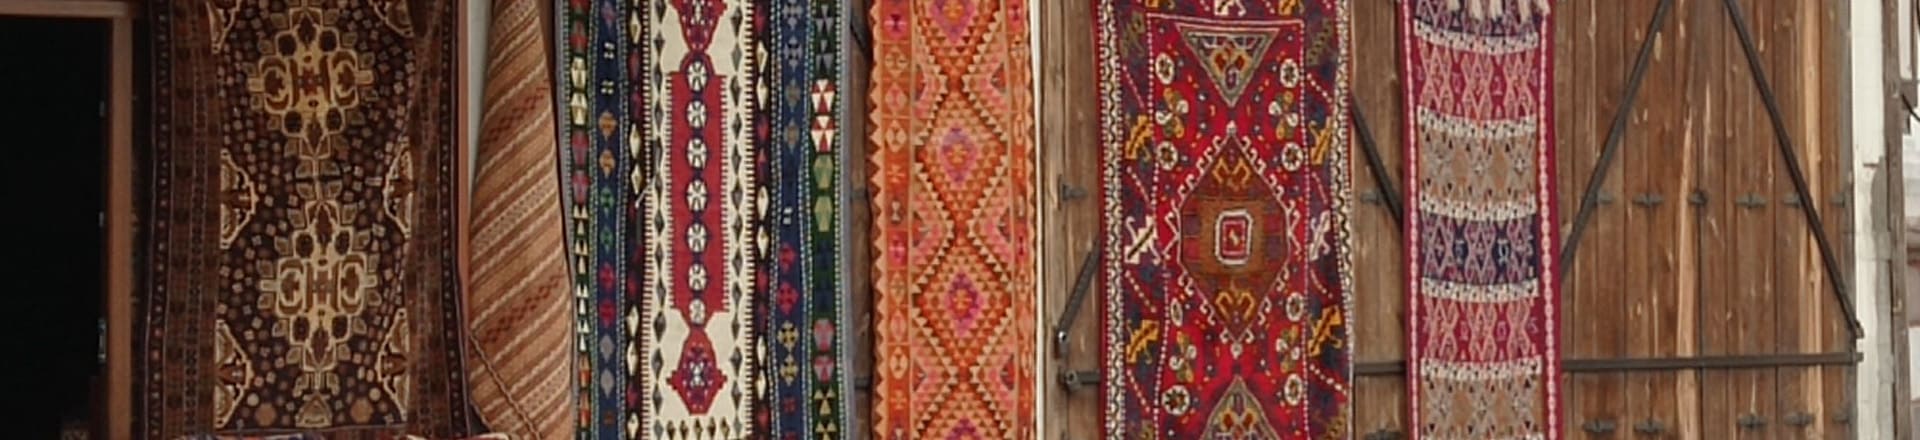 Preserve Your Oriental Rugs with Expert Care Tips & Services